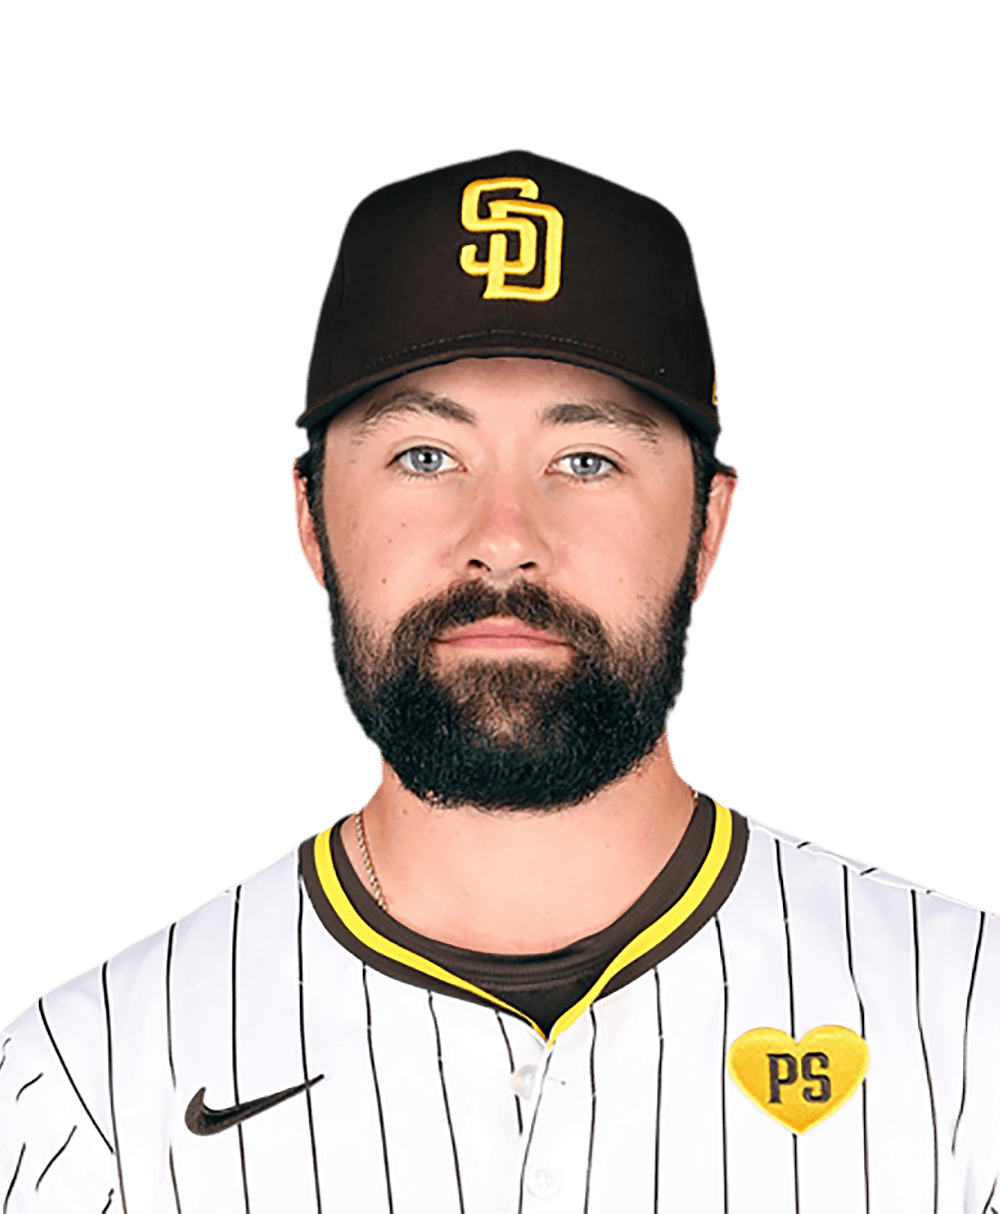 Padres' Matt Waldron becomes first knuckleball pitcher in MLB